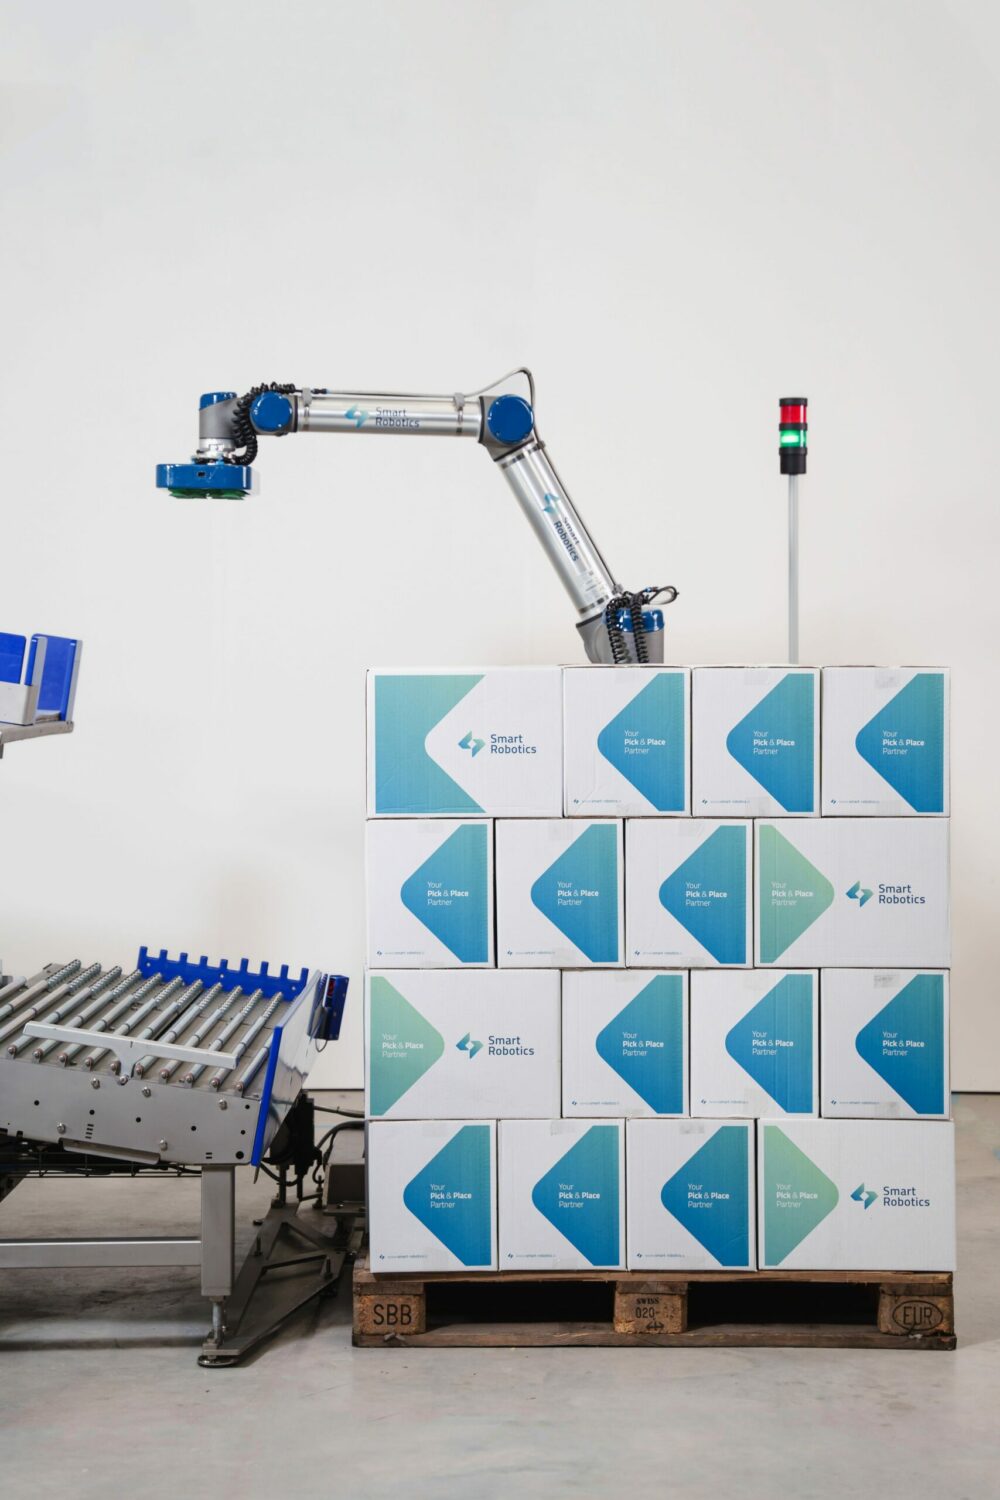 Pick & place robot at automated AutoStore port